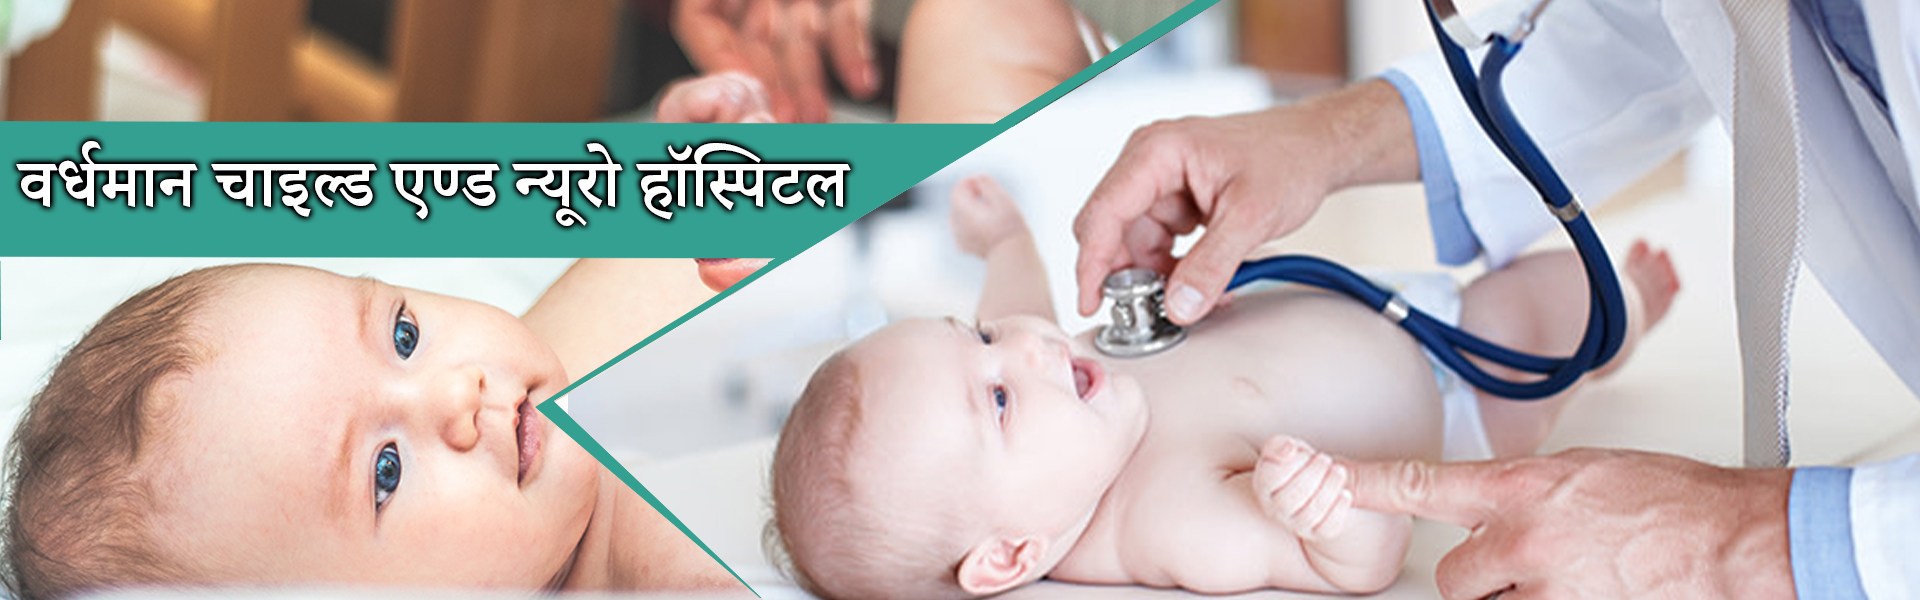 Obstestric & Gynecologist in Lucknow